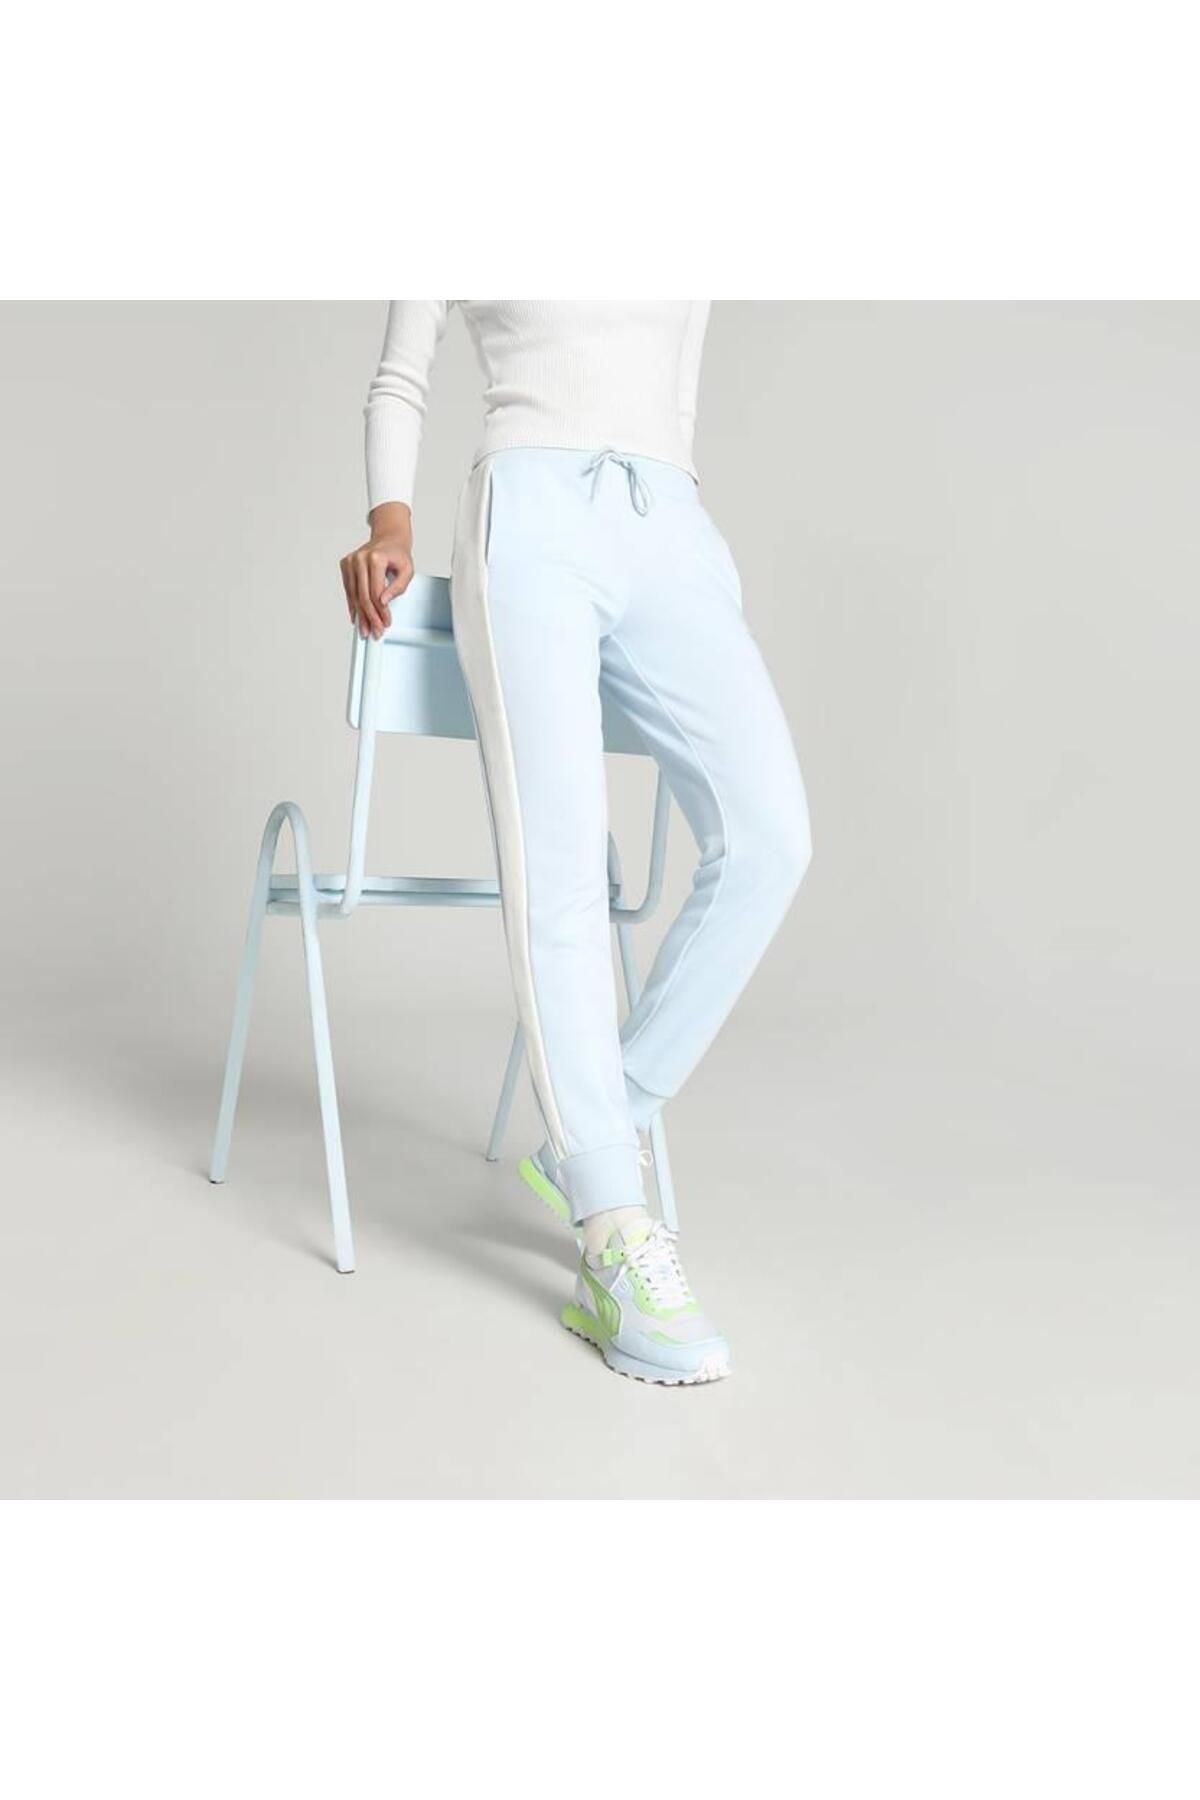 Puma Iconic T7 Track Pants TR cl (s) Icy Blue